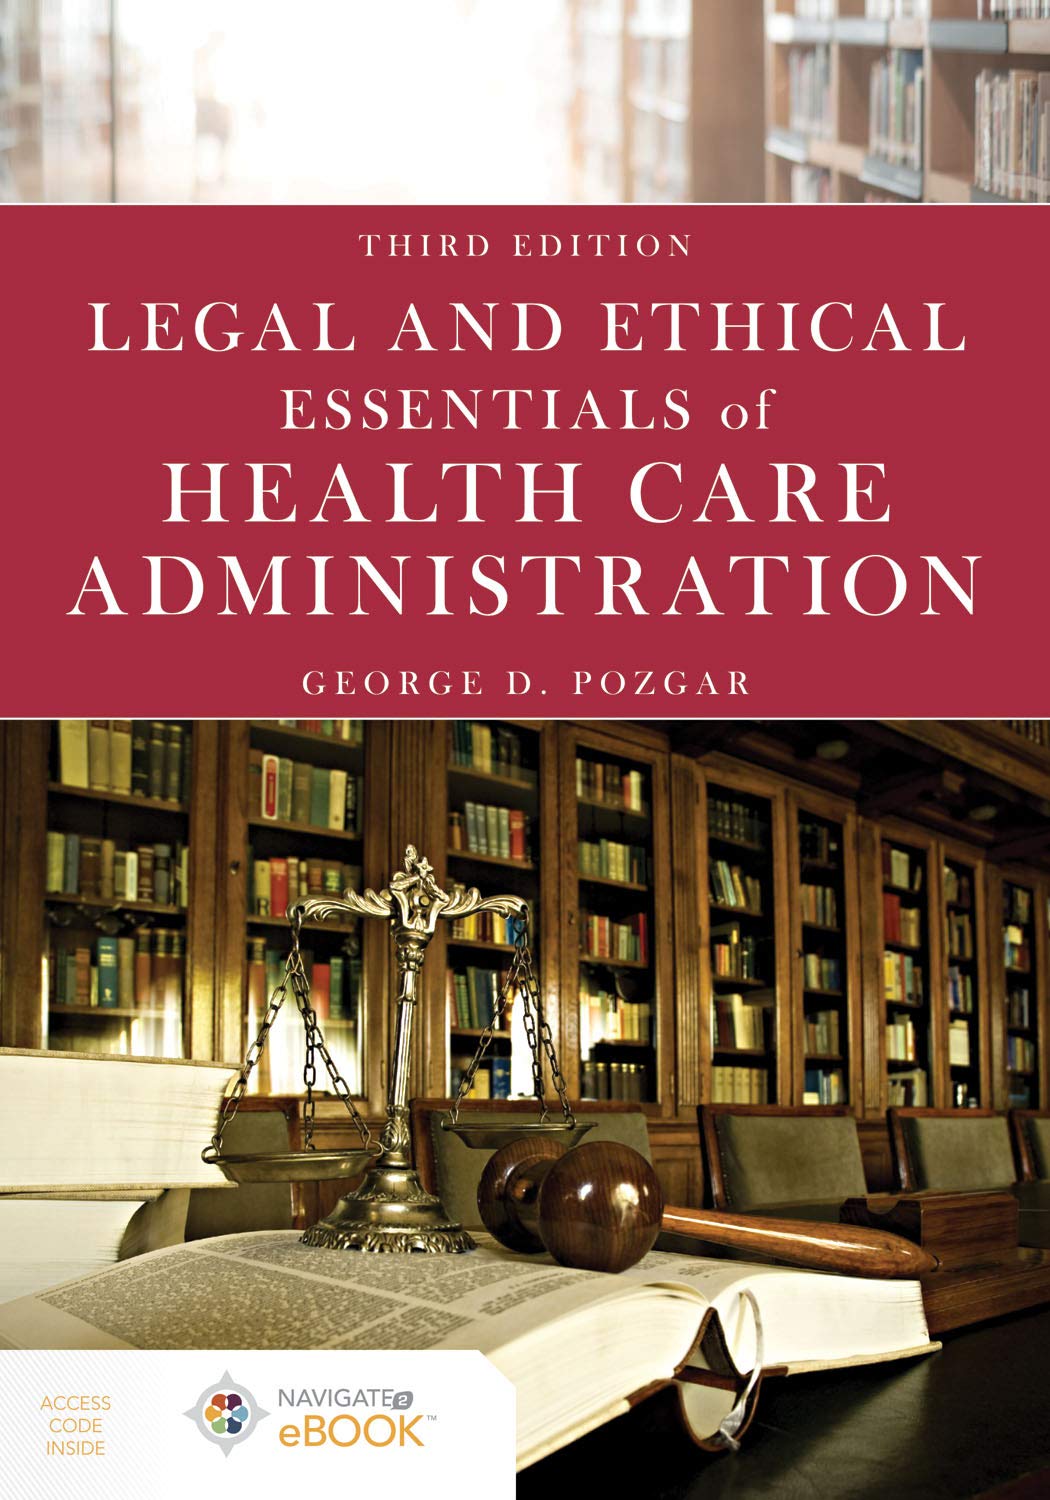 Legal and Ethical Essentials of Health Care Administration, 3rd Edition  by George D. Pozgar 